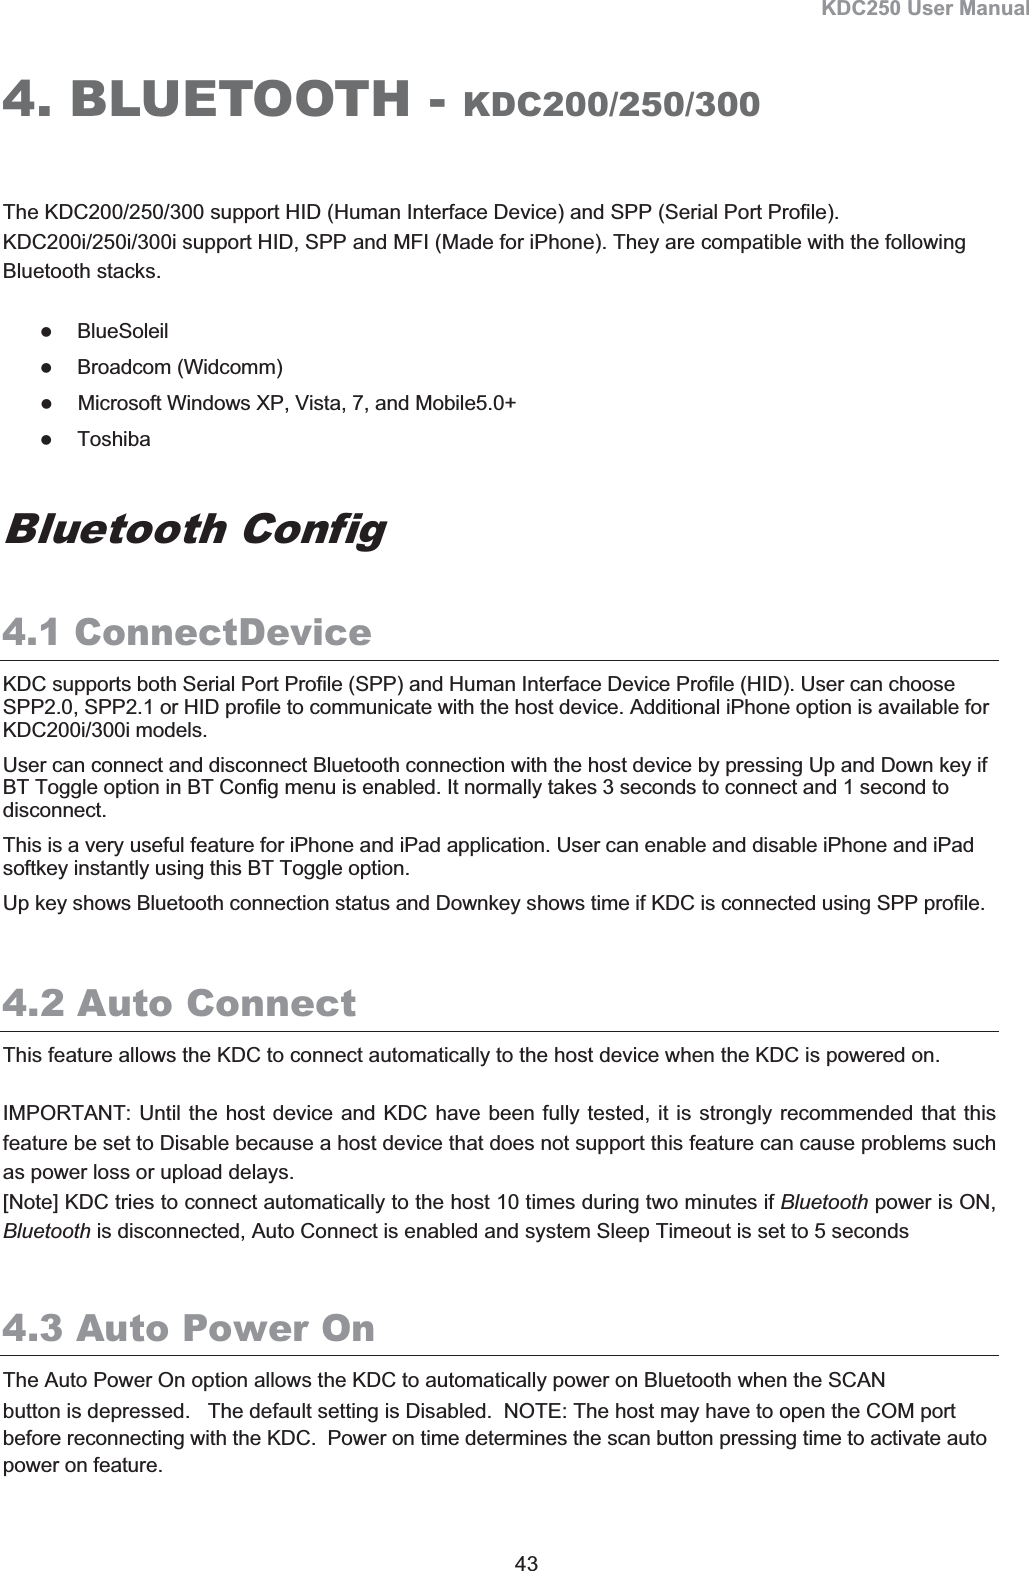 KDC250 User Manual 43 4. BLUETOOTH - KDC200/250/300The KDC200/250/300 support HID (Human Interface Device) and SPP (Serial Port Profile). KDC200i/250i/300i support HID, SPP and MFI (Made for iPhone). They are compatible with the following Bluetooth stacks.  zBlueSoleilzBroadcom (Widcomm)zMicrosoft Windows XP, Vista, 7, and Mobile5.0+ zToshiba Bluetooth Config 4.1 ConnectDeviceKDC supports both Serial Port Profile (SPP) and Human Interface Device Profile (HID). User can choose SPP2.0, SPP2.1 or HID profile to communicate with the host device. Additional iPhone option is available for KDC200i/300i models.  User can connect and disconnect Bluetooth connection with the host device by pressing Up and Down key if BT Toggle option in BT Config menu is enabled. It normally takes 3 seconds to connect and 1 second to disconnect.  This is a very useful feature for iPhone and iPad application. User can enable and disable iPhone and iPad softkey instantly using this BT Toggle option. Up key shows Bluetooth connection status and Downkey shows time if KDC is connected using SPP profile. 4.2 Auto ConnectThis feature allows the KDC to connect automatically to the host device when the KDC is powered on.  IMPORTANT: Until the host device and KDC have been fully tested, it is strongly recommended that this feature be set to Disable because a host device that does not support this feature can cause problems such as power loss or upload delays.  [Note] KDC tries to connect automatically to the host 10 times during two minutes if Bluetooth power is ON, Bluetooth is disconnected, Auto Connect is enabled and system Sleep Timeout is set to 5 seconds 4.3 Auto Power OnThe Auto Power On option allows the KDC to automatically power on Bluetooth when the SCAN  button is depressed.   The default setting is Disabled.  NOTE: The host may have to open the COM port before reconnecting with the KDC.  Power on time determines the scan button pressing time to activate auto power on feature. 